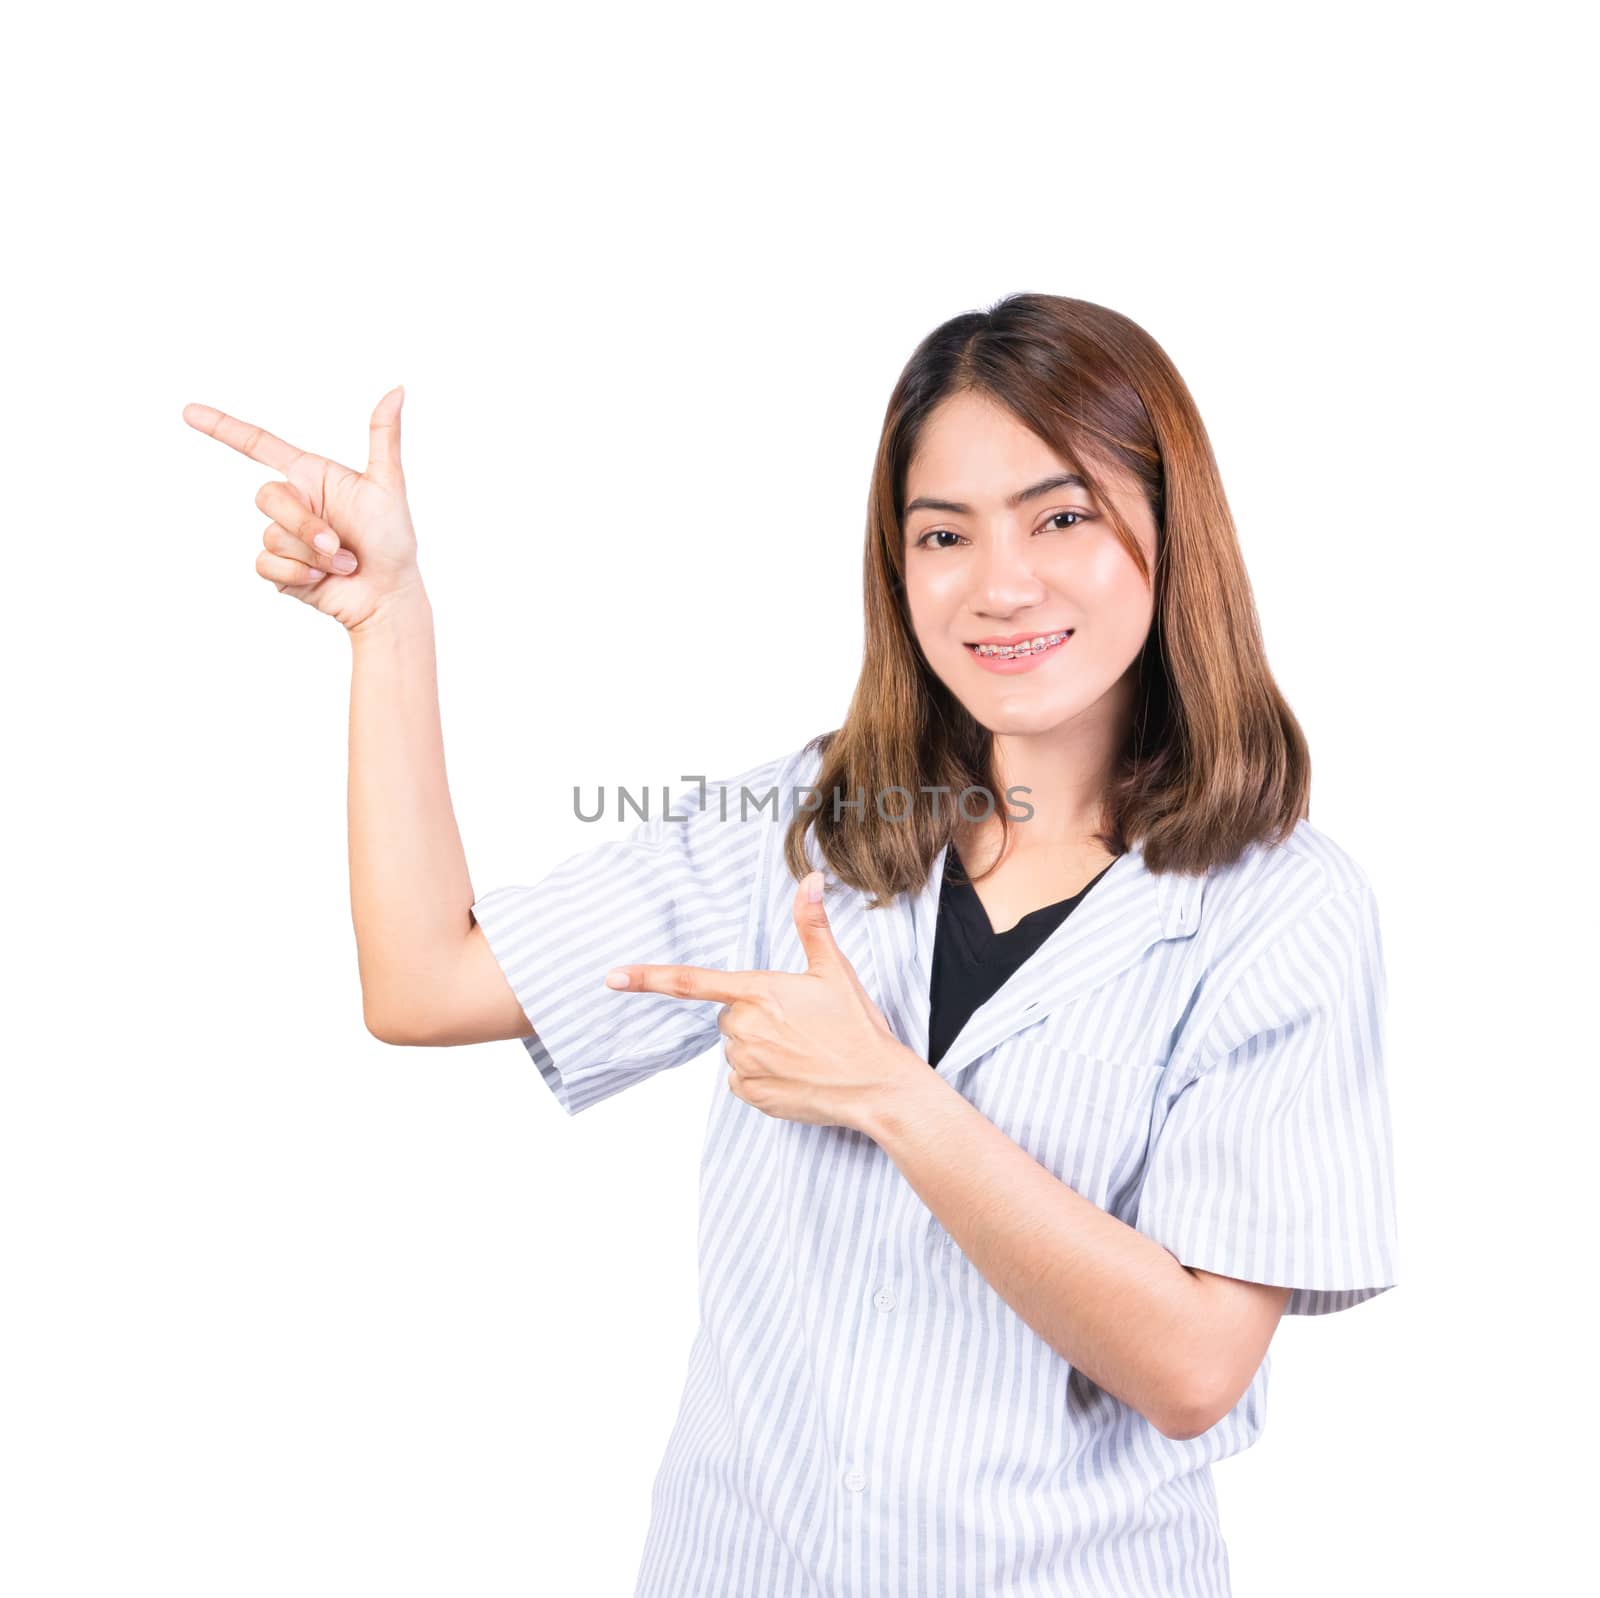 woman pointing finger up portrait on white background by pramot